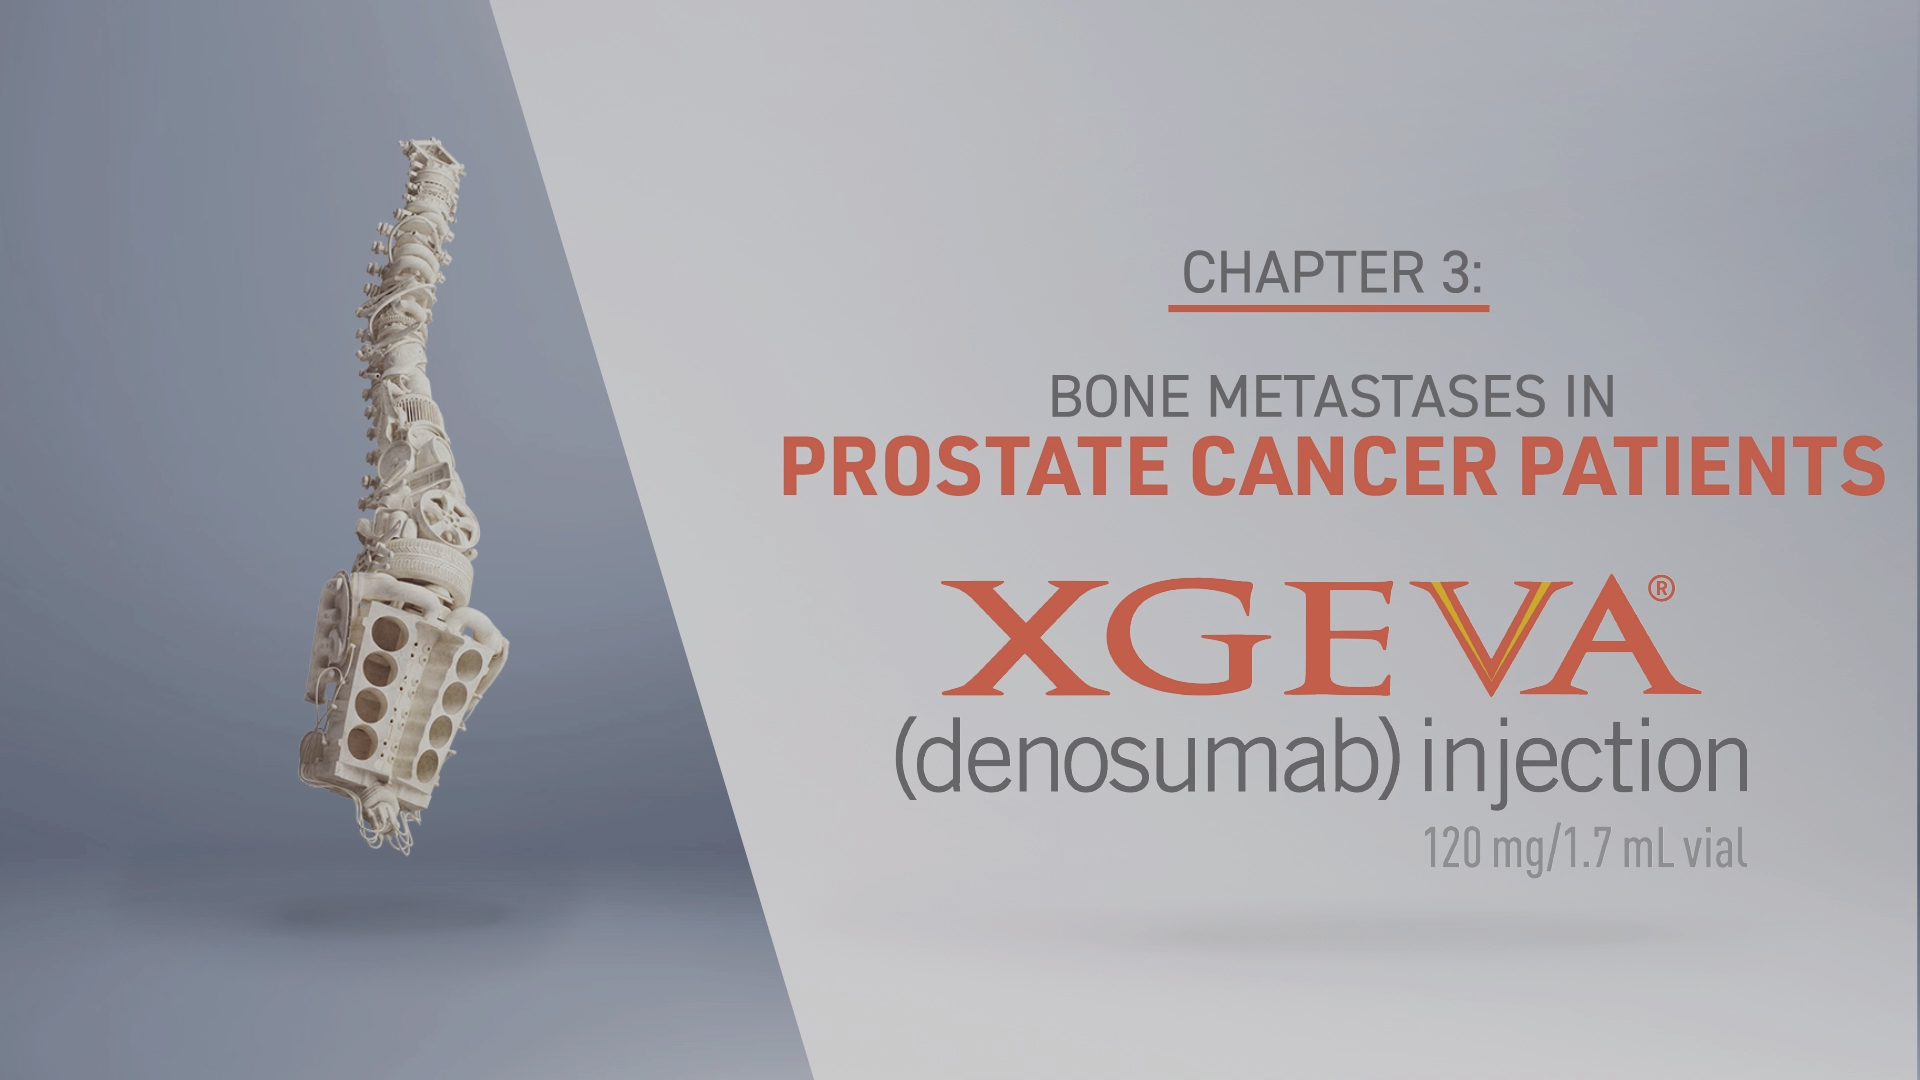 Chapter one: Watch a video about how Dr. Berenson uses XGEVA® with his Multiple Myeloma Patients